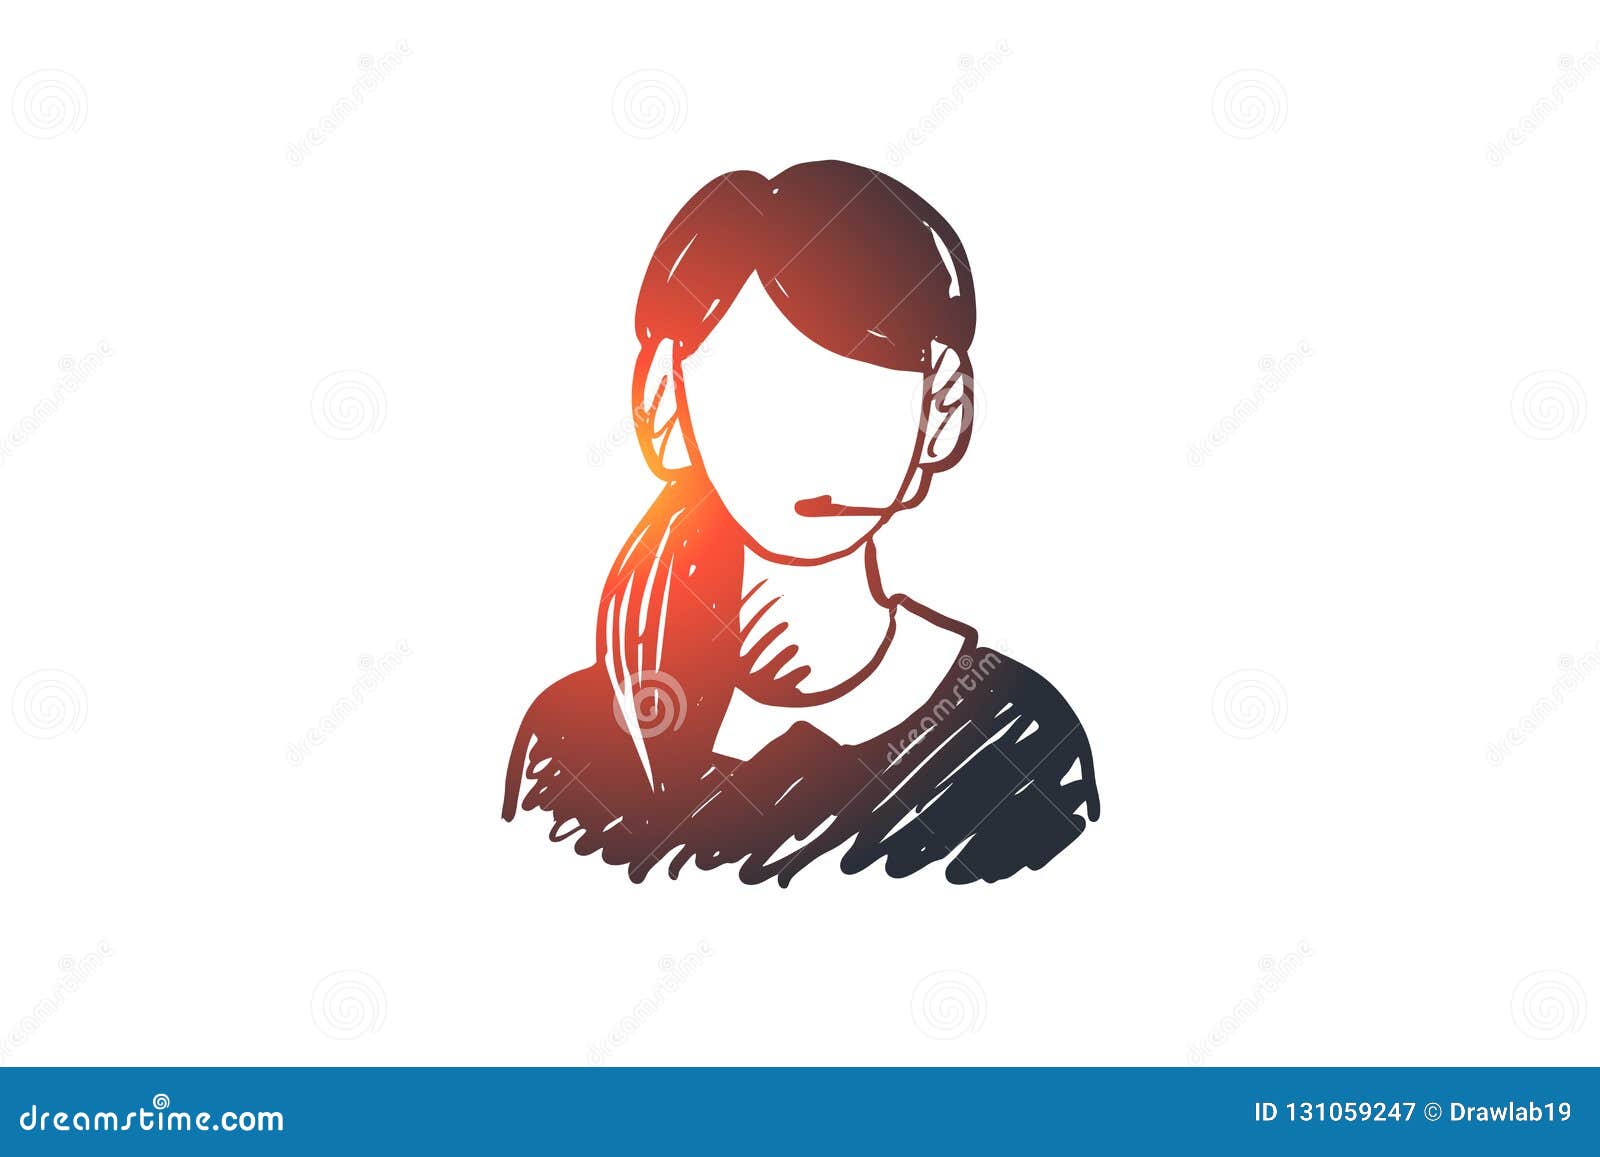 40 Drawing Of A Call Center Agent Illustrations RoyaltyFree Vector  Graphics  Clip Art  iStock